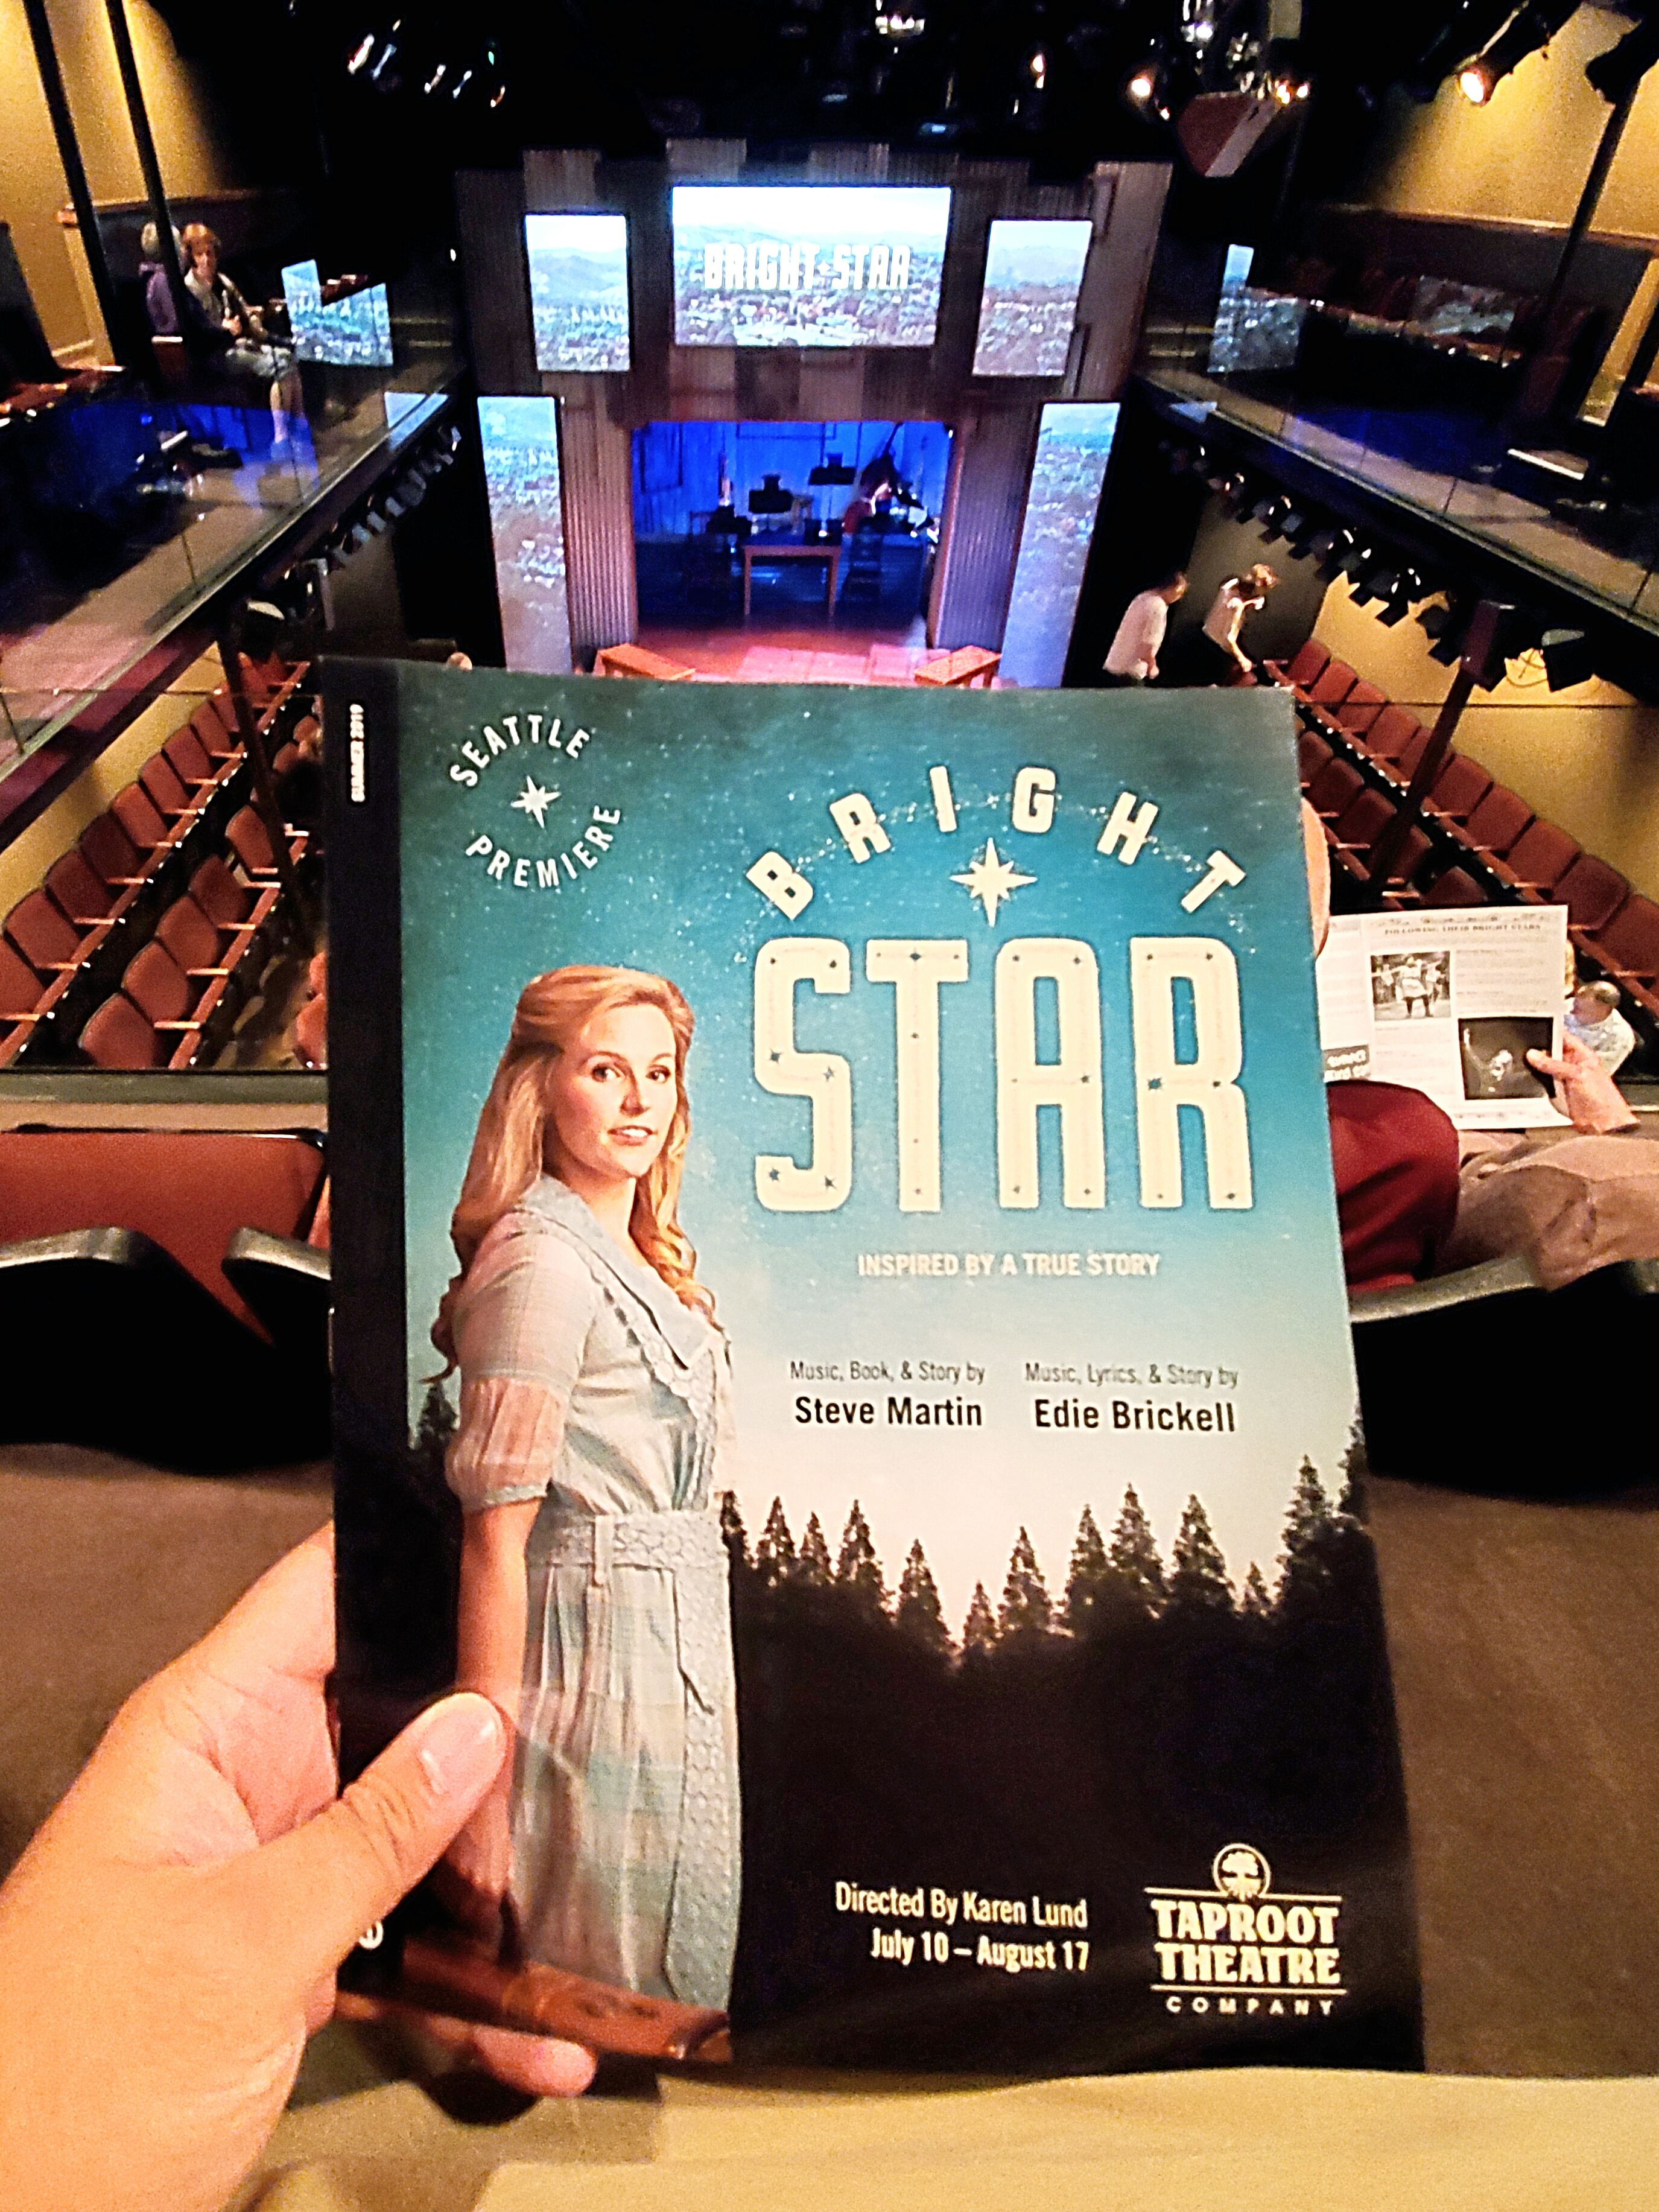 Bright Star: A New Musical by Steve Martin at Taproot Theatre. Unexpectedly good #musical despite all the #folk #country #bluegrass music (which I surprisingly enjoyed) & depictions of the backwards #South. Talented lead actress. Proud to have accurately predicted two major plots twists ?. #Southern